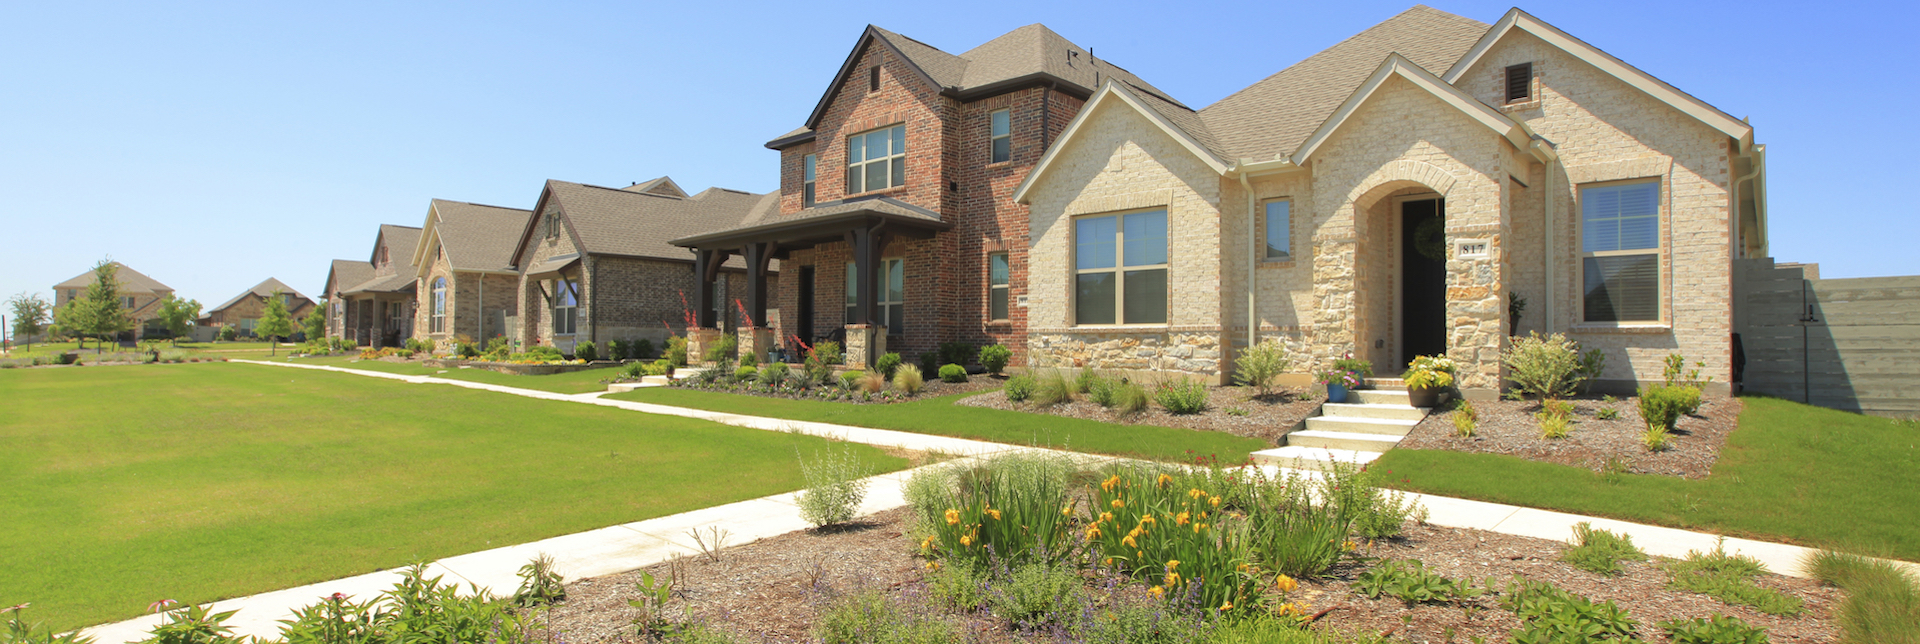 new homes in denton county